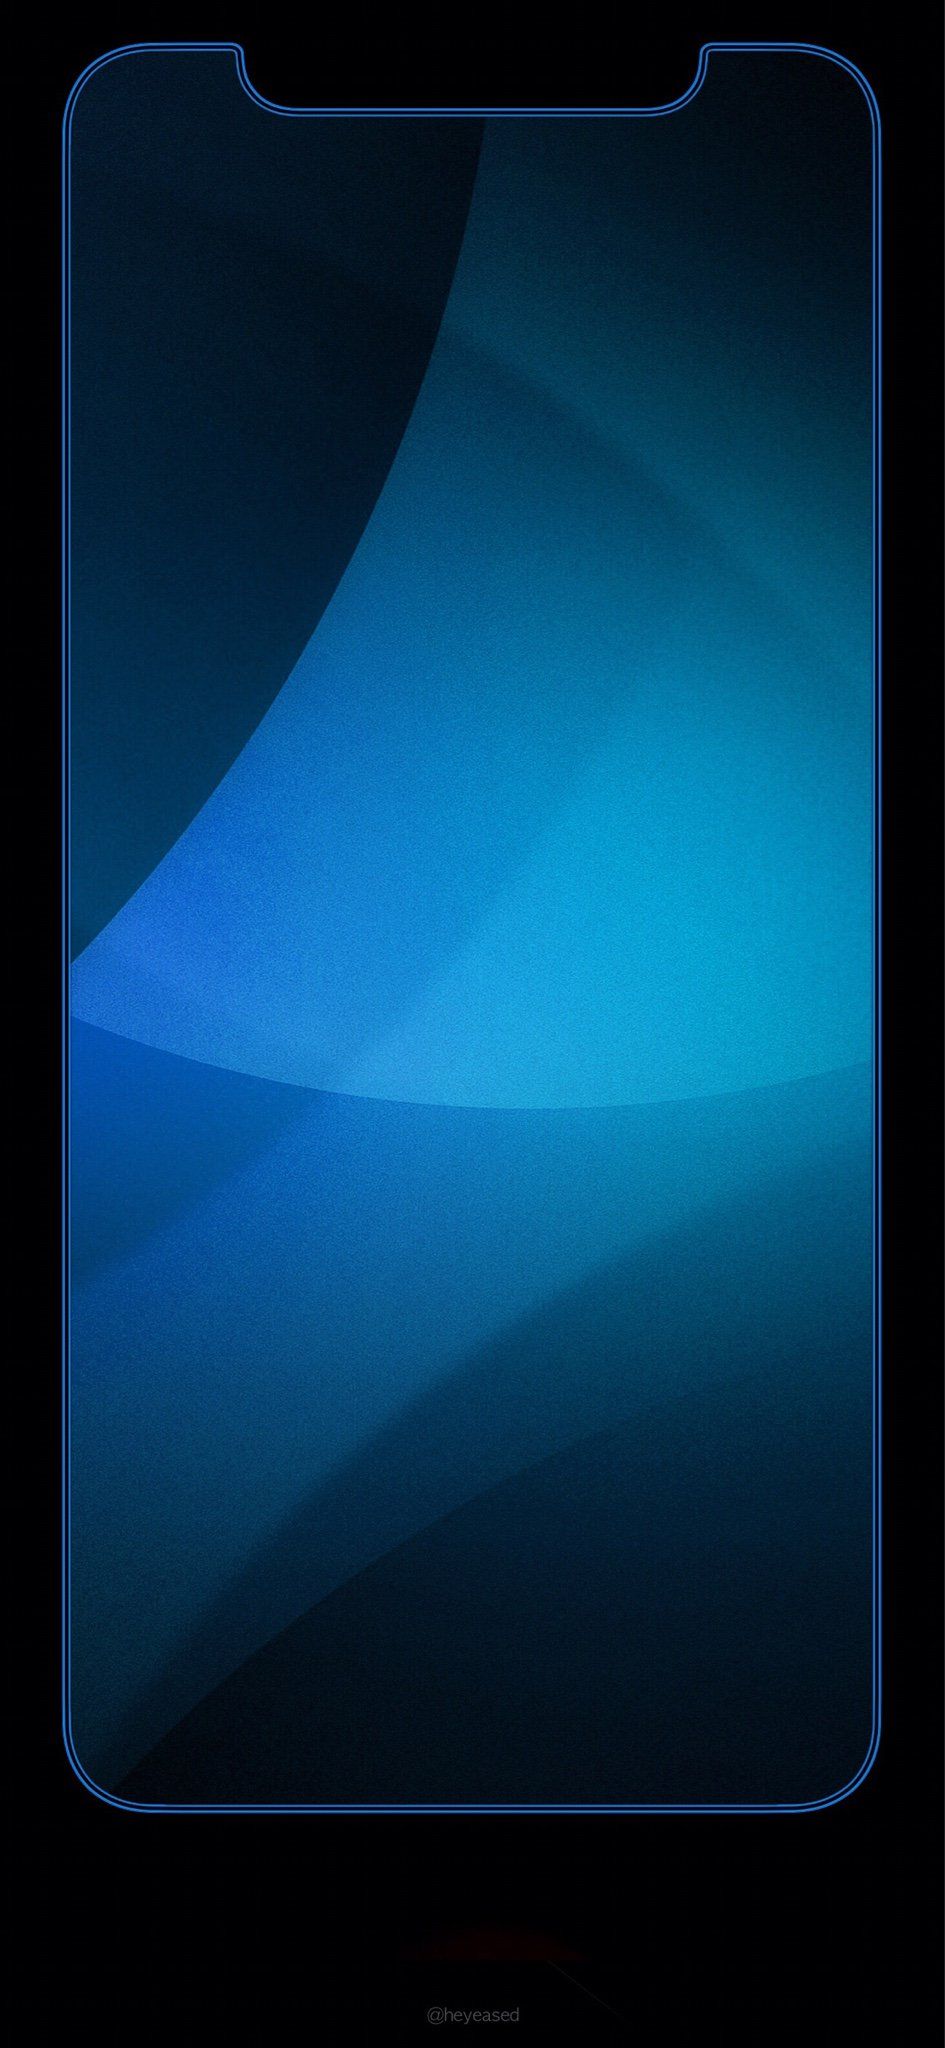 The IPhone X Xs Wallpaper Thread, IPad, IPod Forums At IMore.com